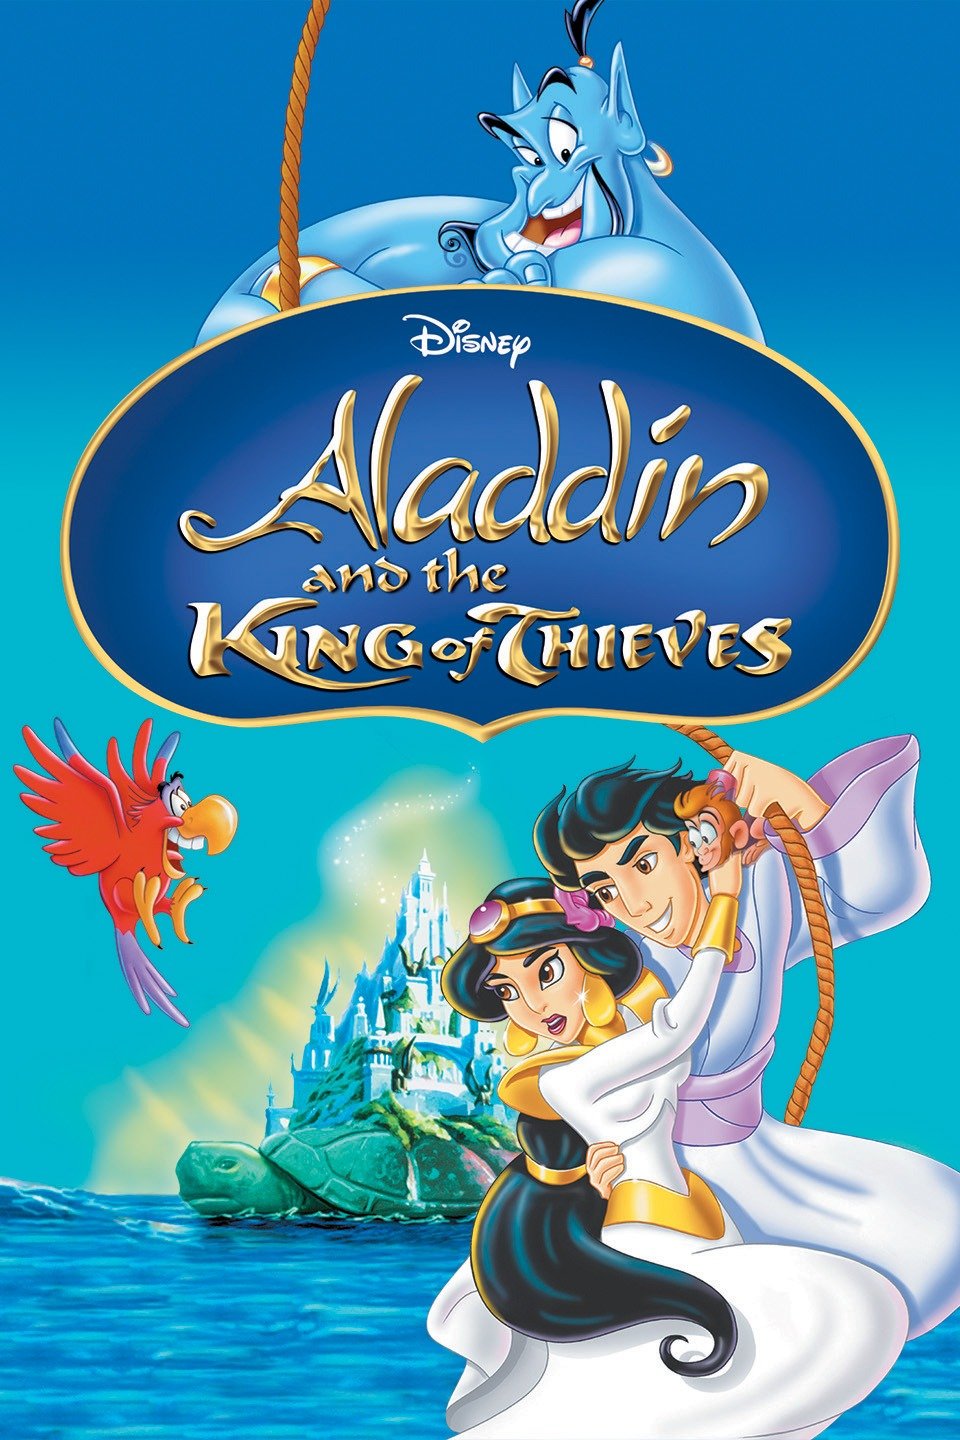 HDTV-1080p | Aladdin and the King of Thieves 1996 -- Seeders: 1 -- Leechers: 0